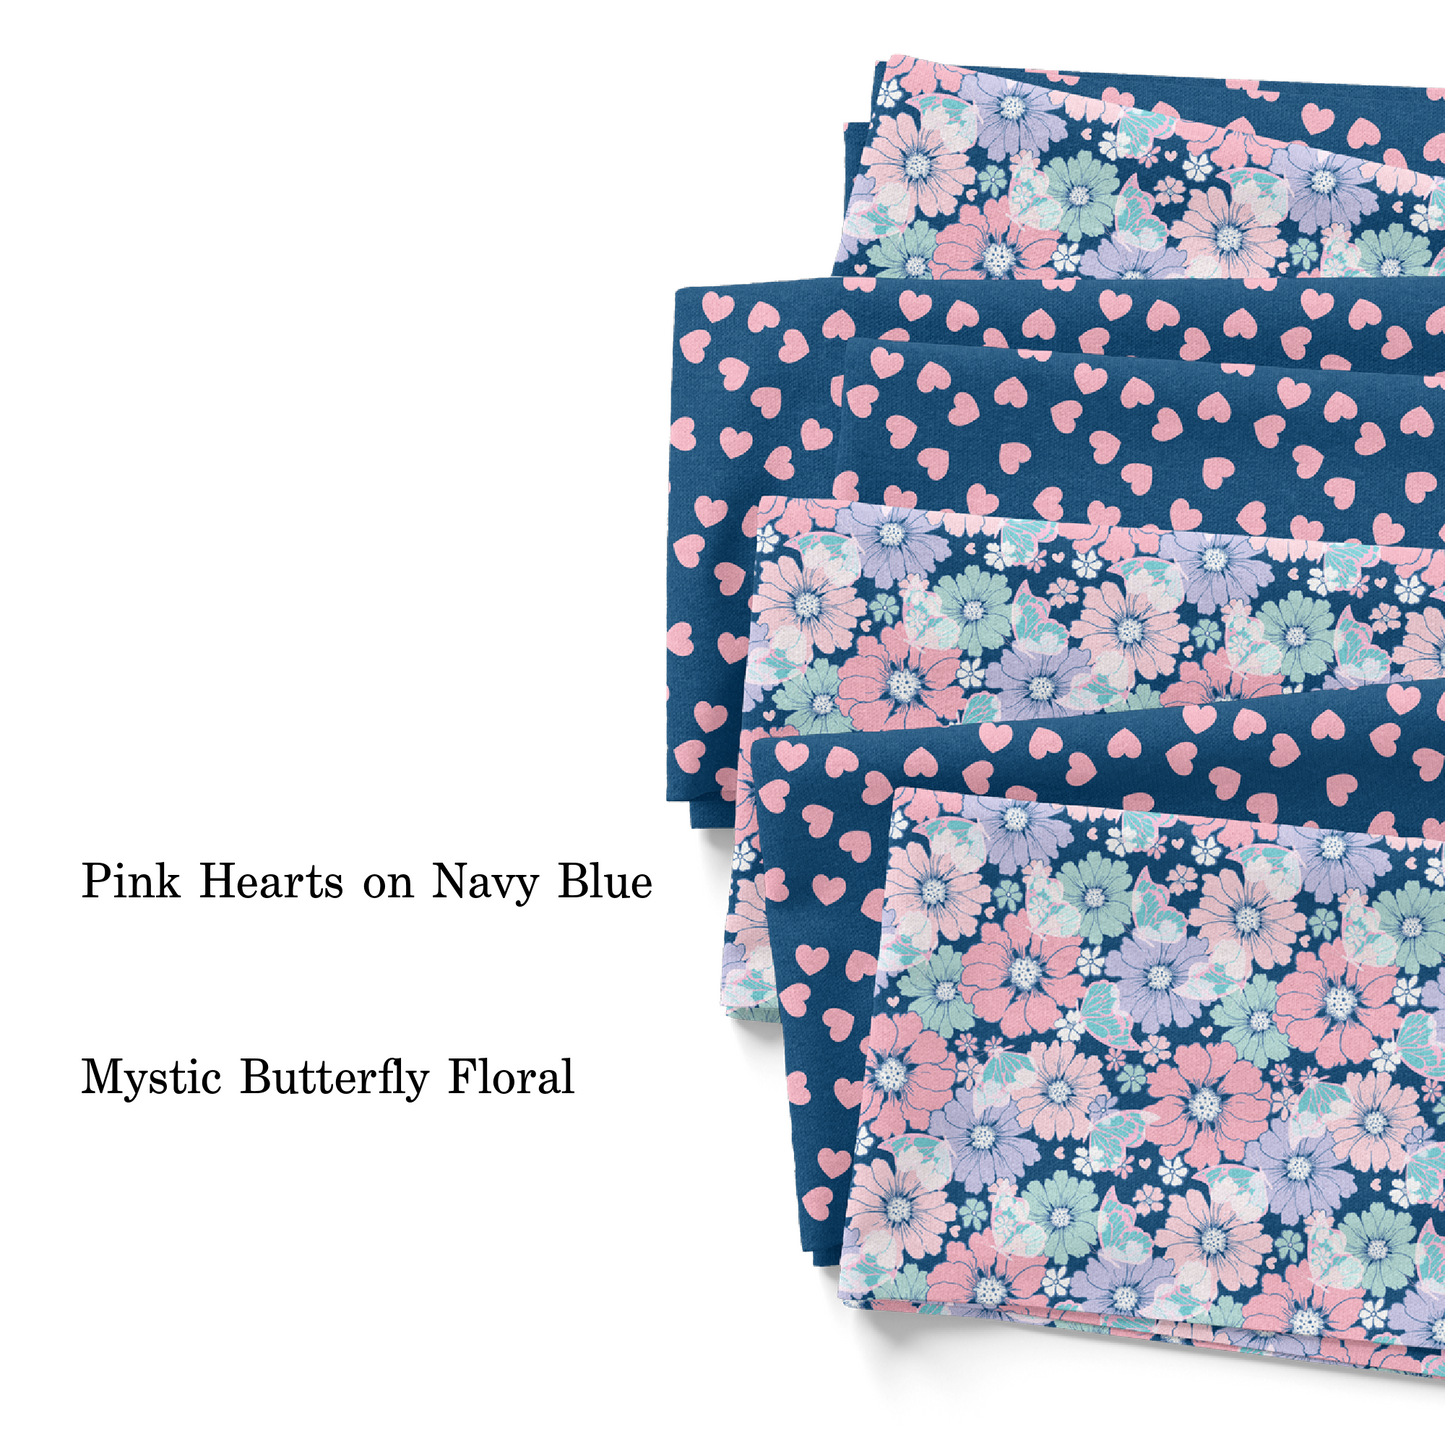 Group photo of pastel flowers in pink, aqua, purple, and white with aqua butterflies on dark navy blue fabric by the yard and pink hearts on navy blue fabric by the yard.